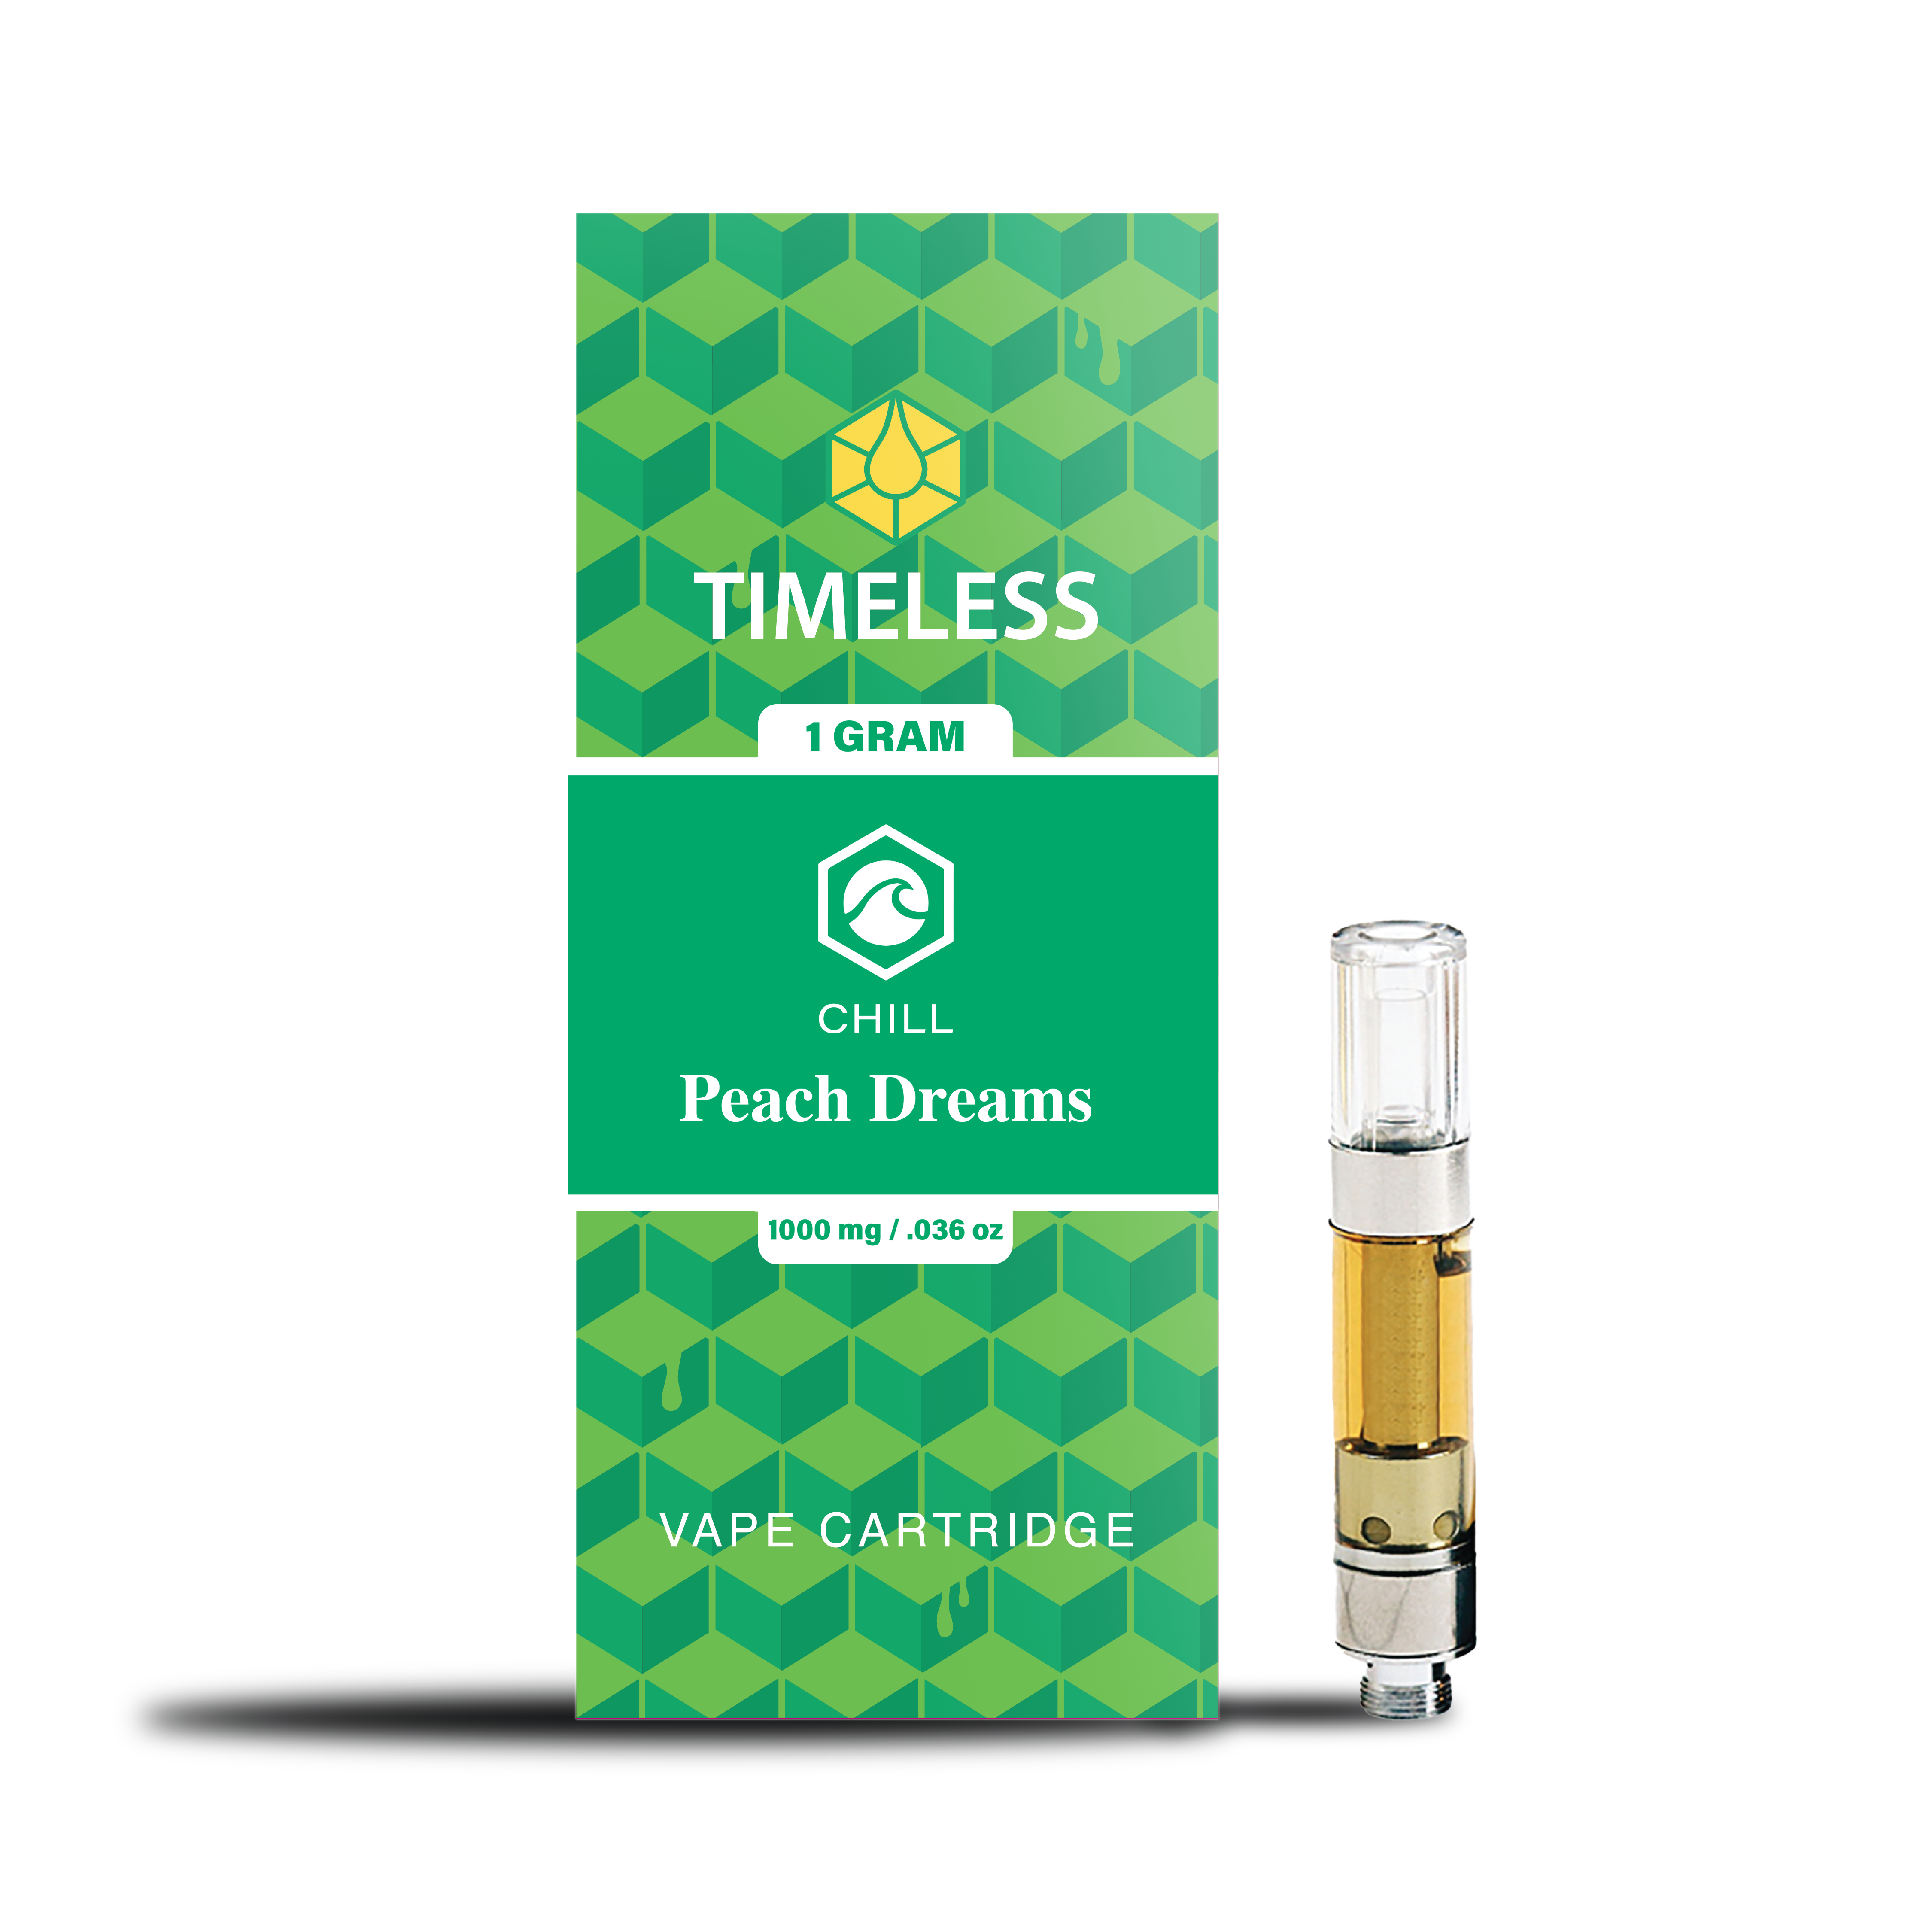 A photograph of Timeless Cartridge (Chill) 1g Peach Dreams